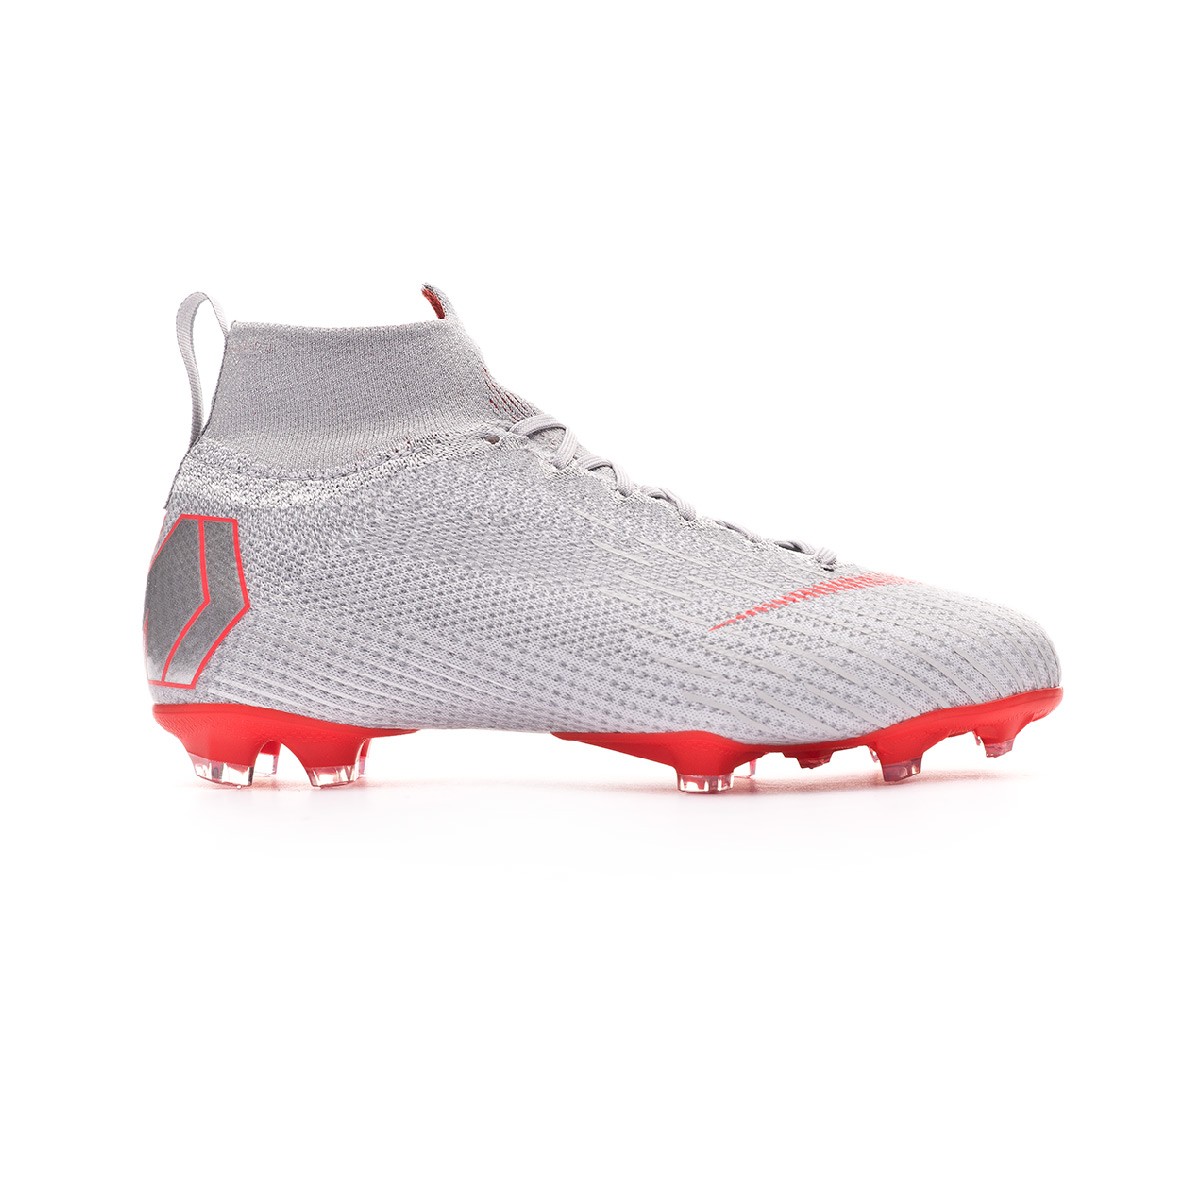 Nike Mercurial Superfly 6 Elite FG New Mens Cleats Off White.